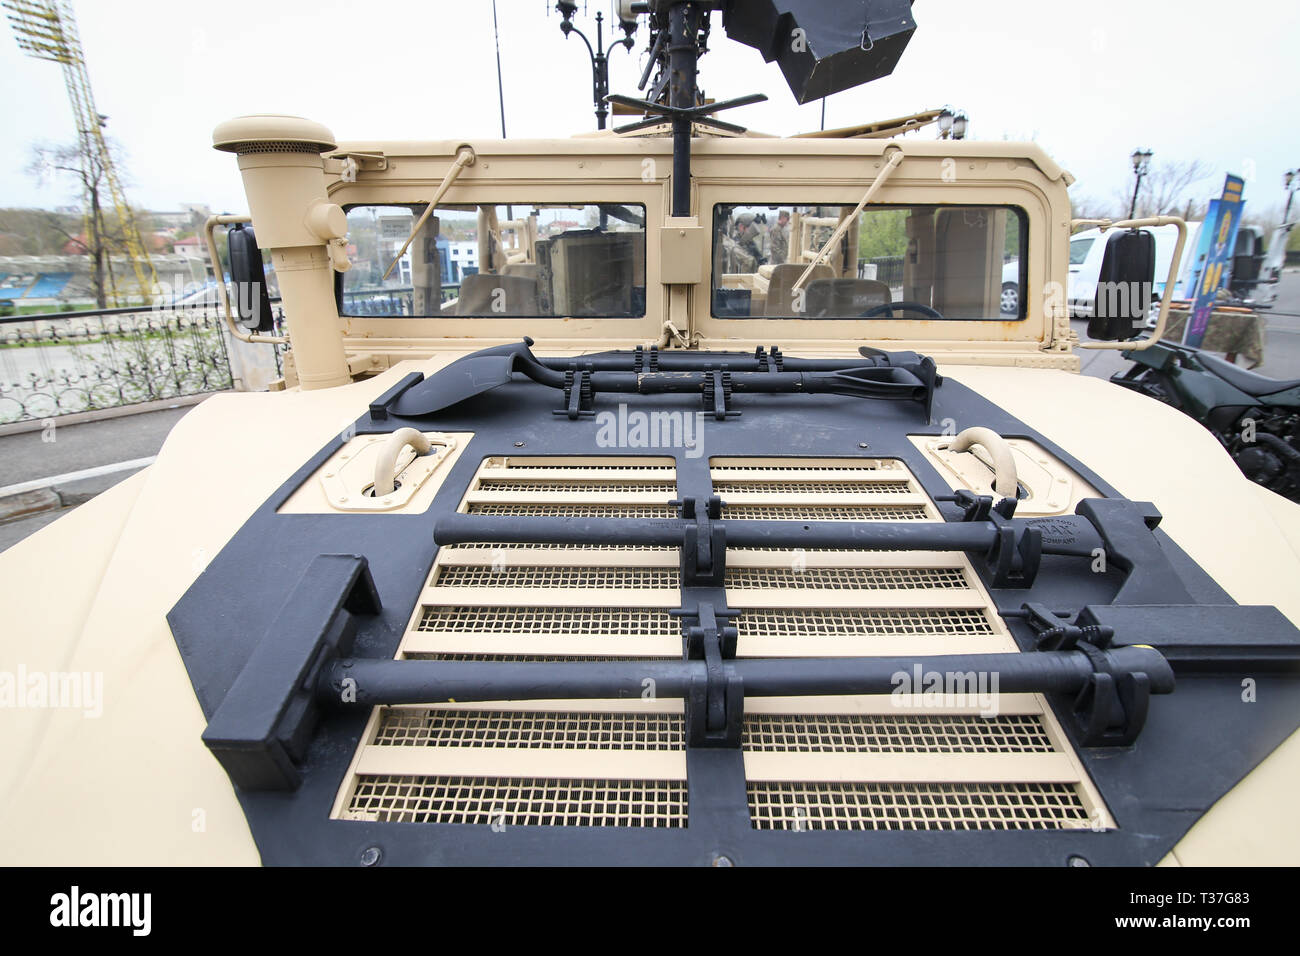 Bucharest, Romania - April 7, 2019: Tools mounted on the hood of a Humvee military vehicle - hammer, axe, shovel and pickaxe Stock Photo